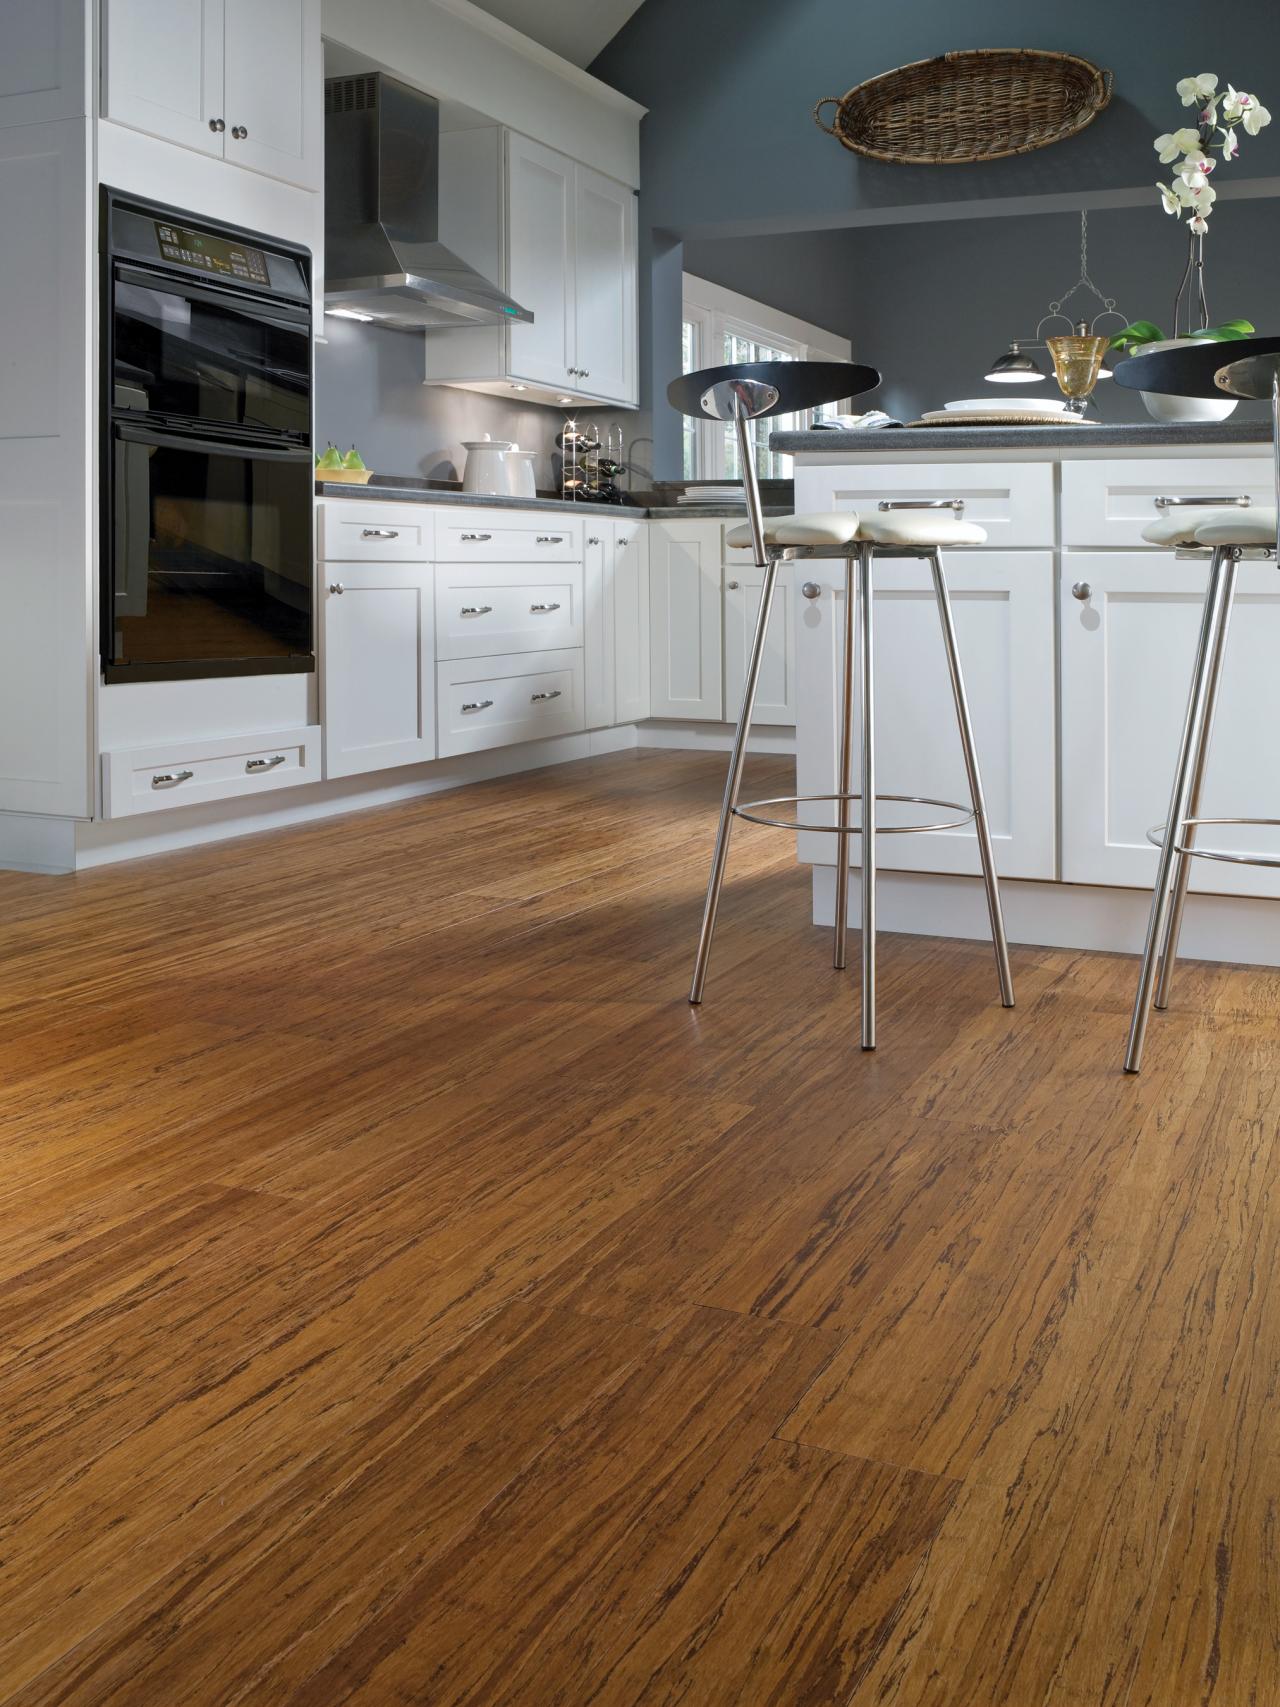 Pros And Cons Of Bamboo Flooring, Are Bamboo Hardwood Floors Good